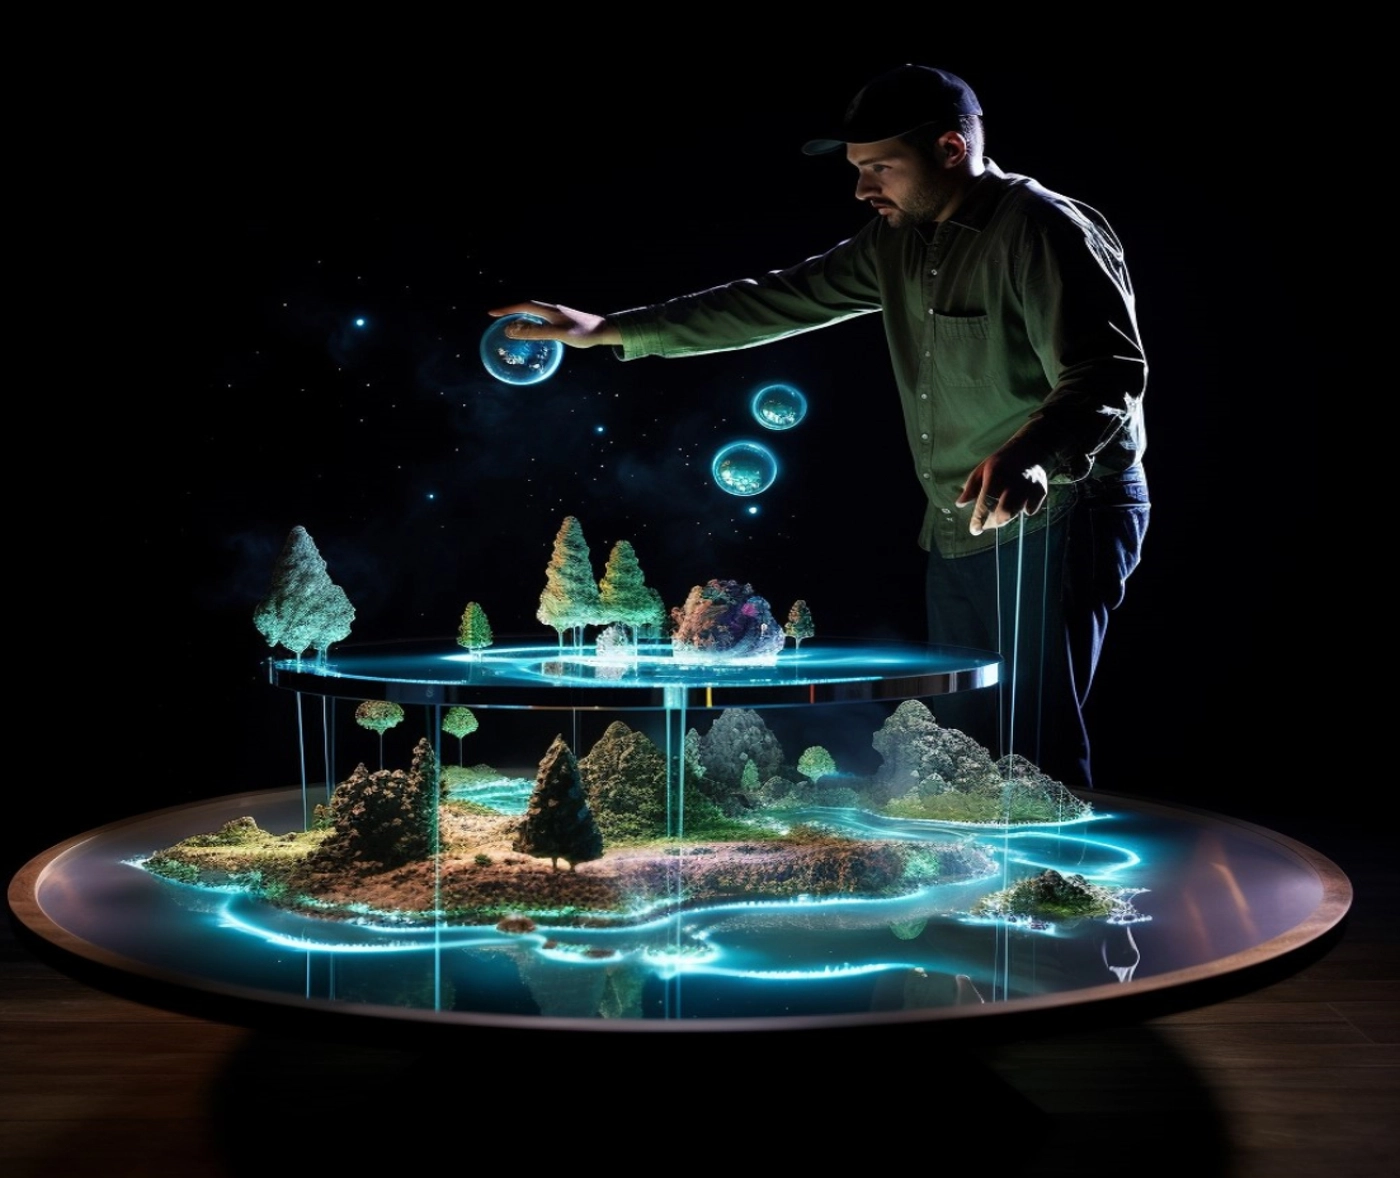 Holographic projection uses special technologies to project 3D holograms into the air, making it appear as though these objects exist in the real world.